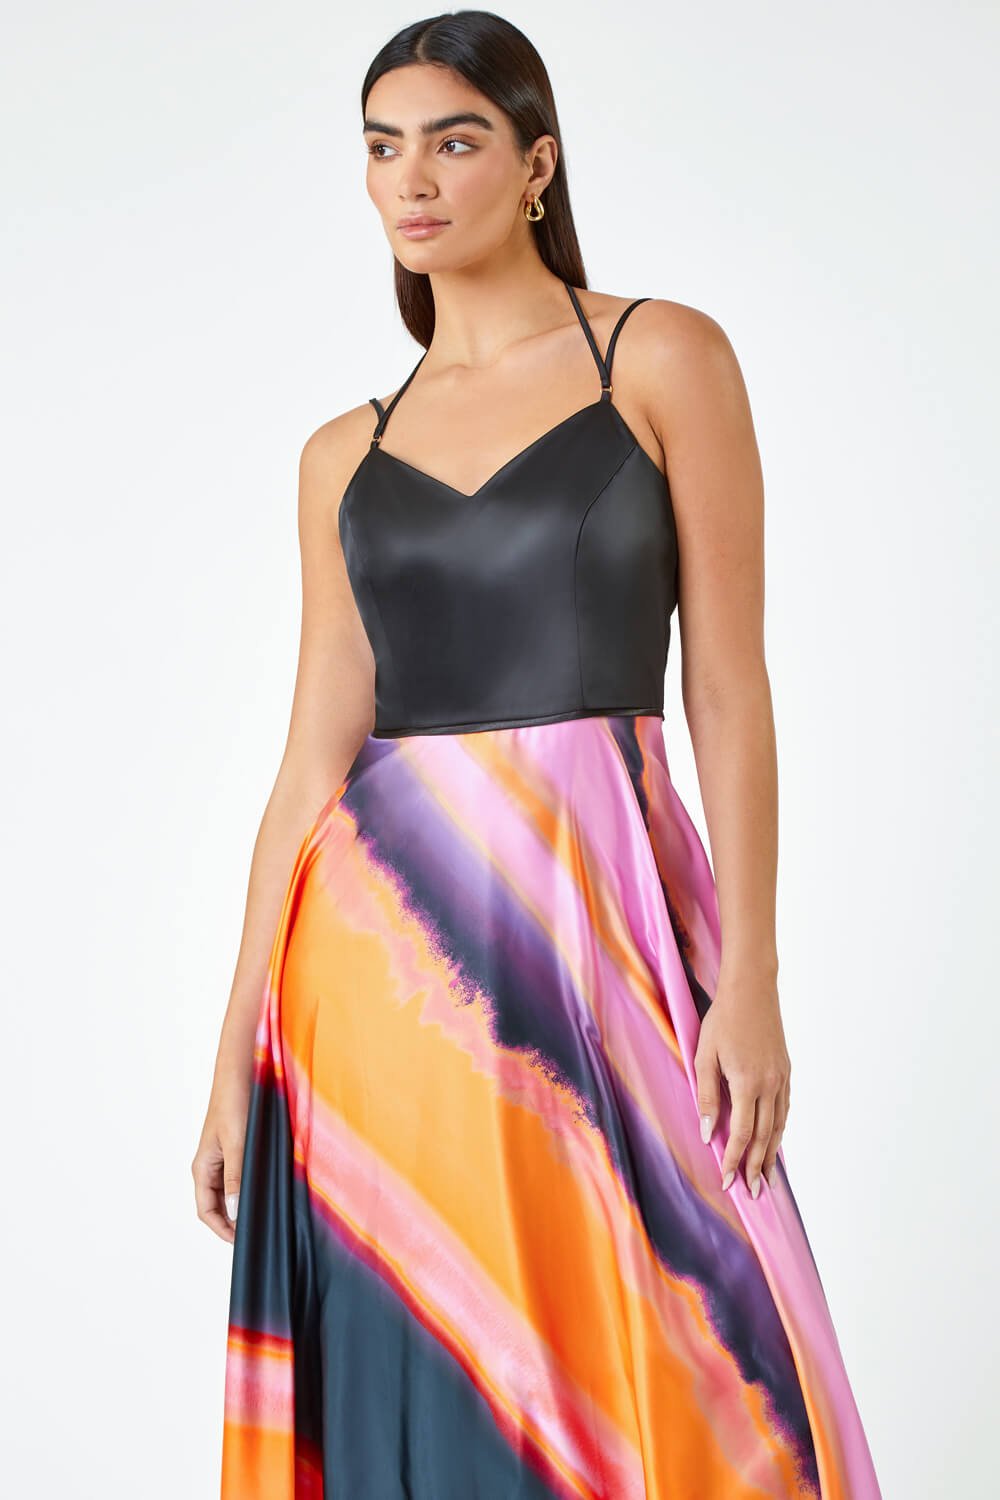 PINK Luxe Colourblock Fit & Flare Maxi Dress, Image 4 of 6